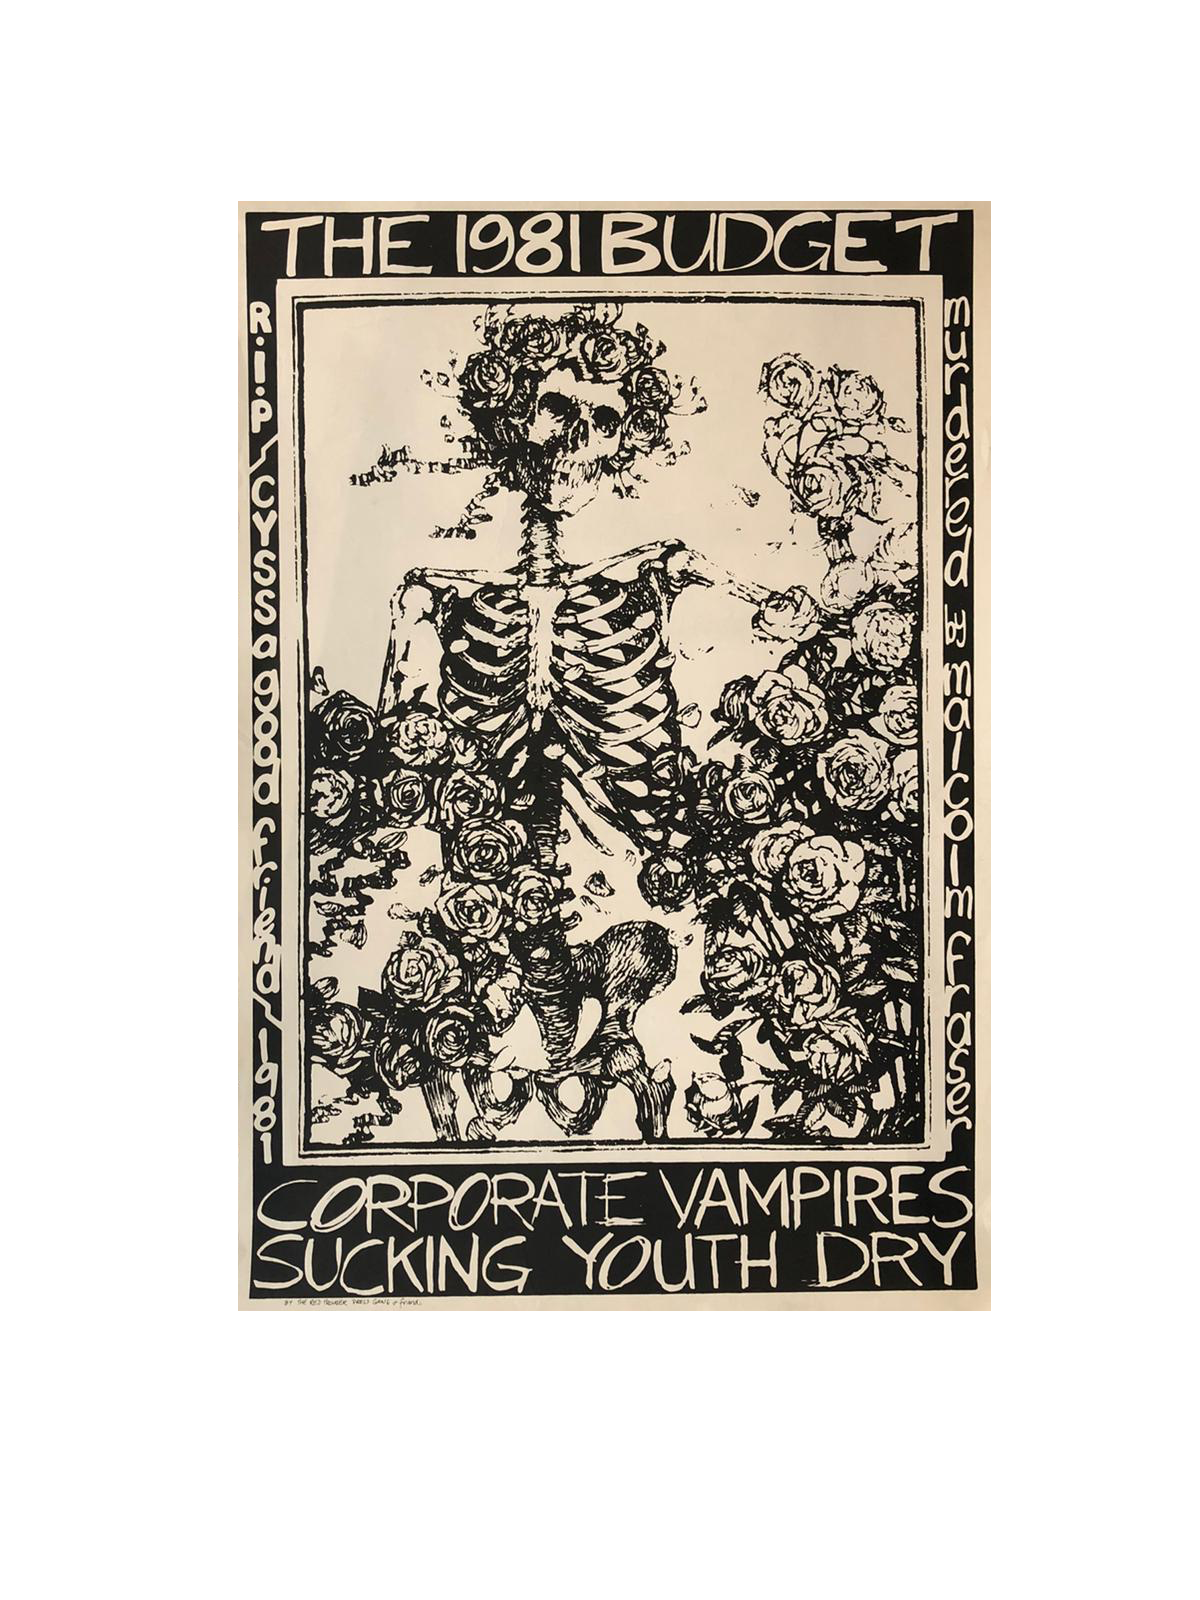 'Corporate Vampires Sucking Youth Dry' 1981 Budget Protest Lithograph